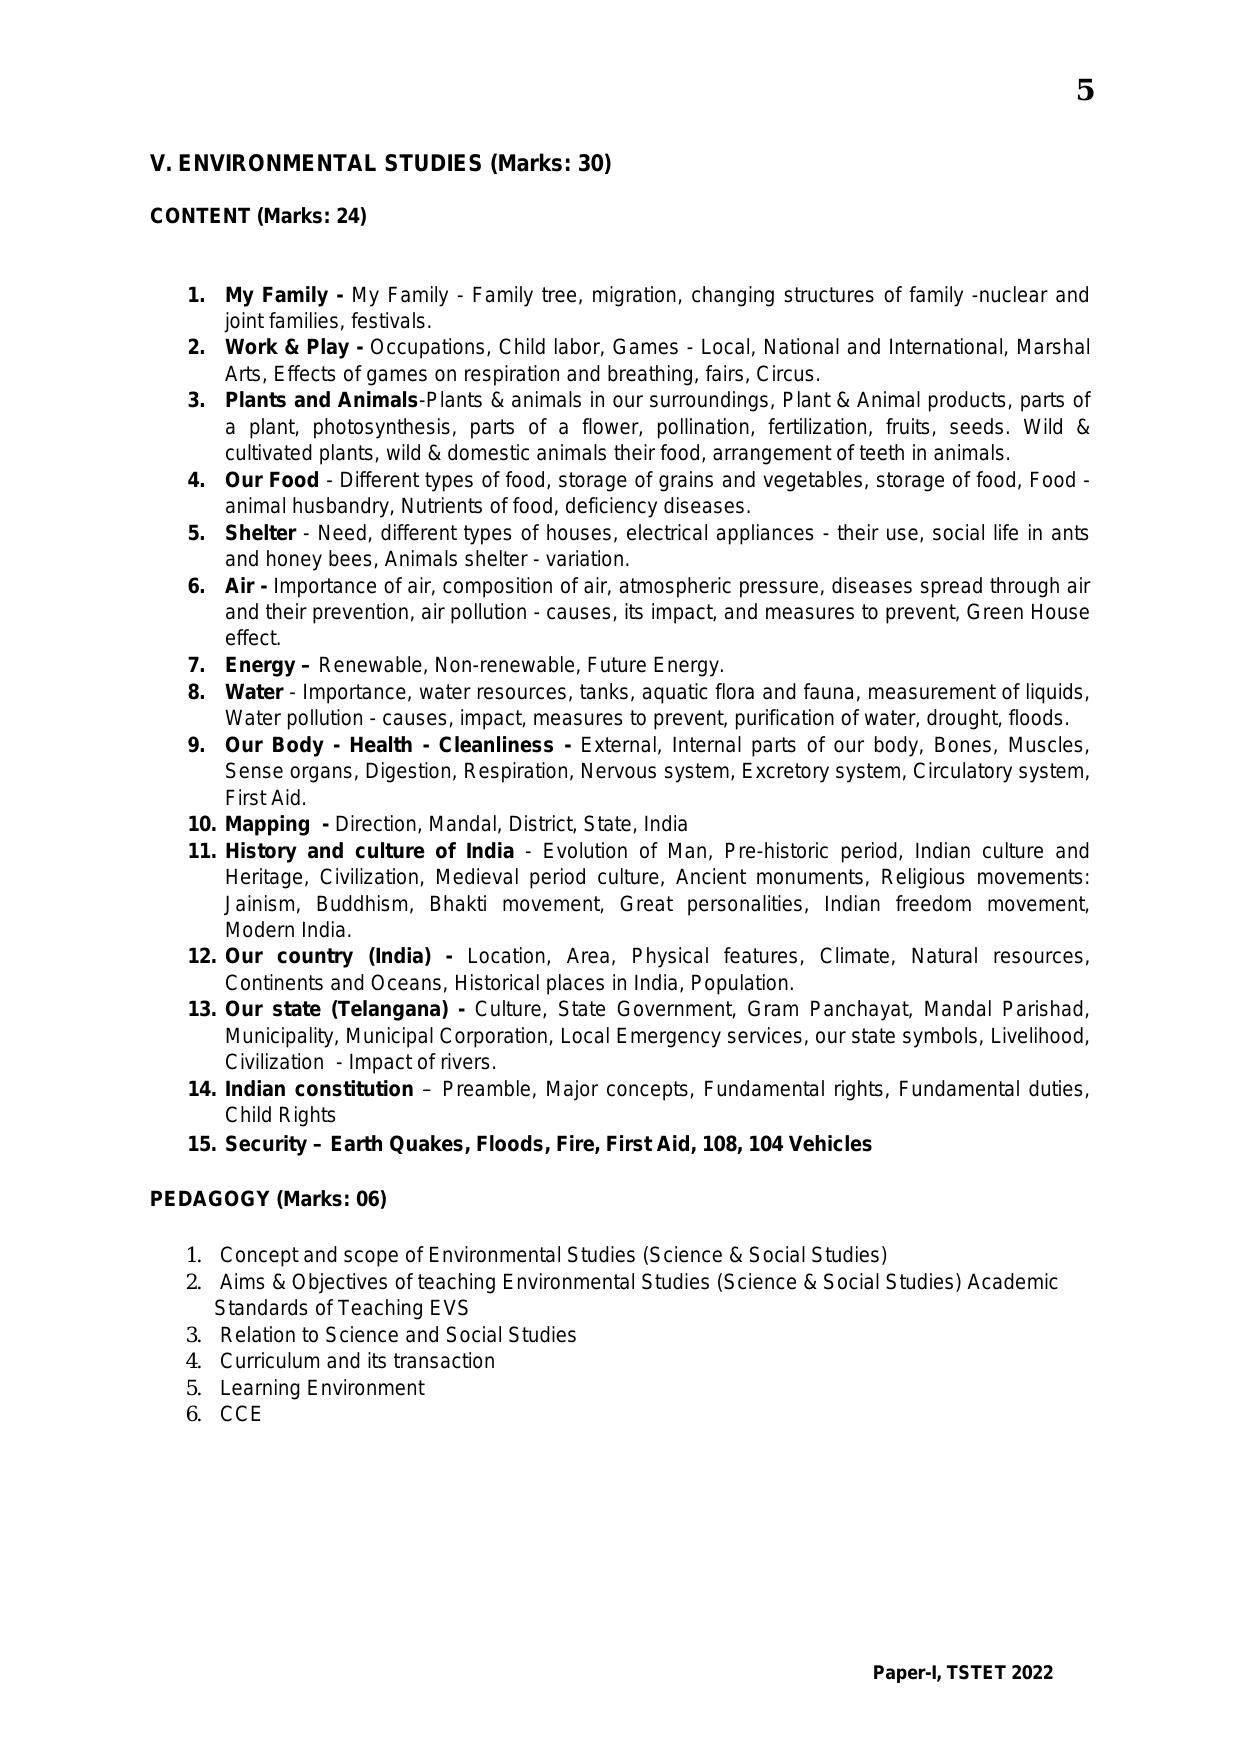 TS TET Syllabus for Paper 1 (Gujrathi) - Page 5